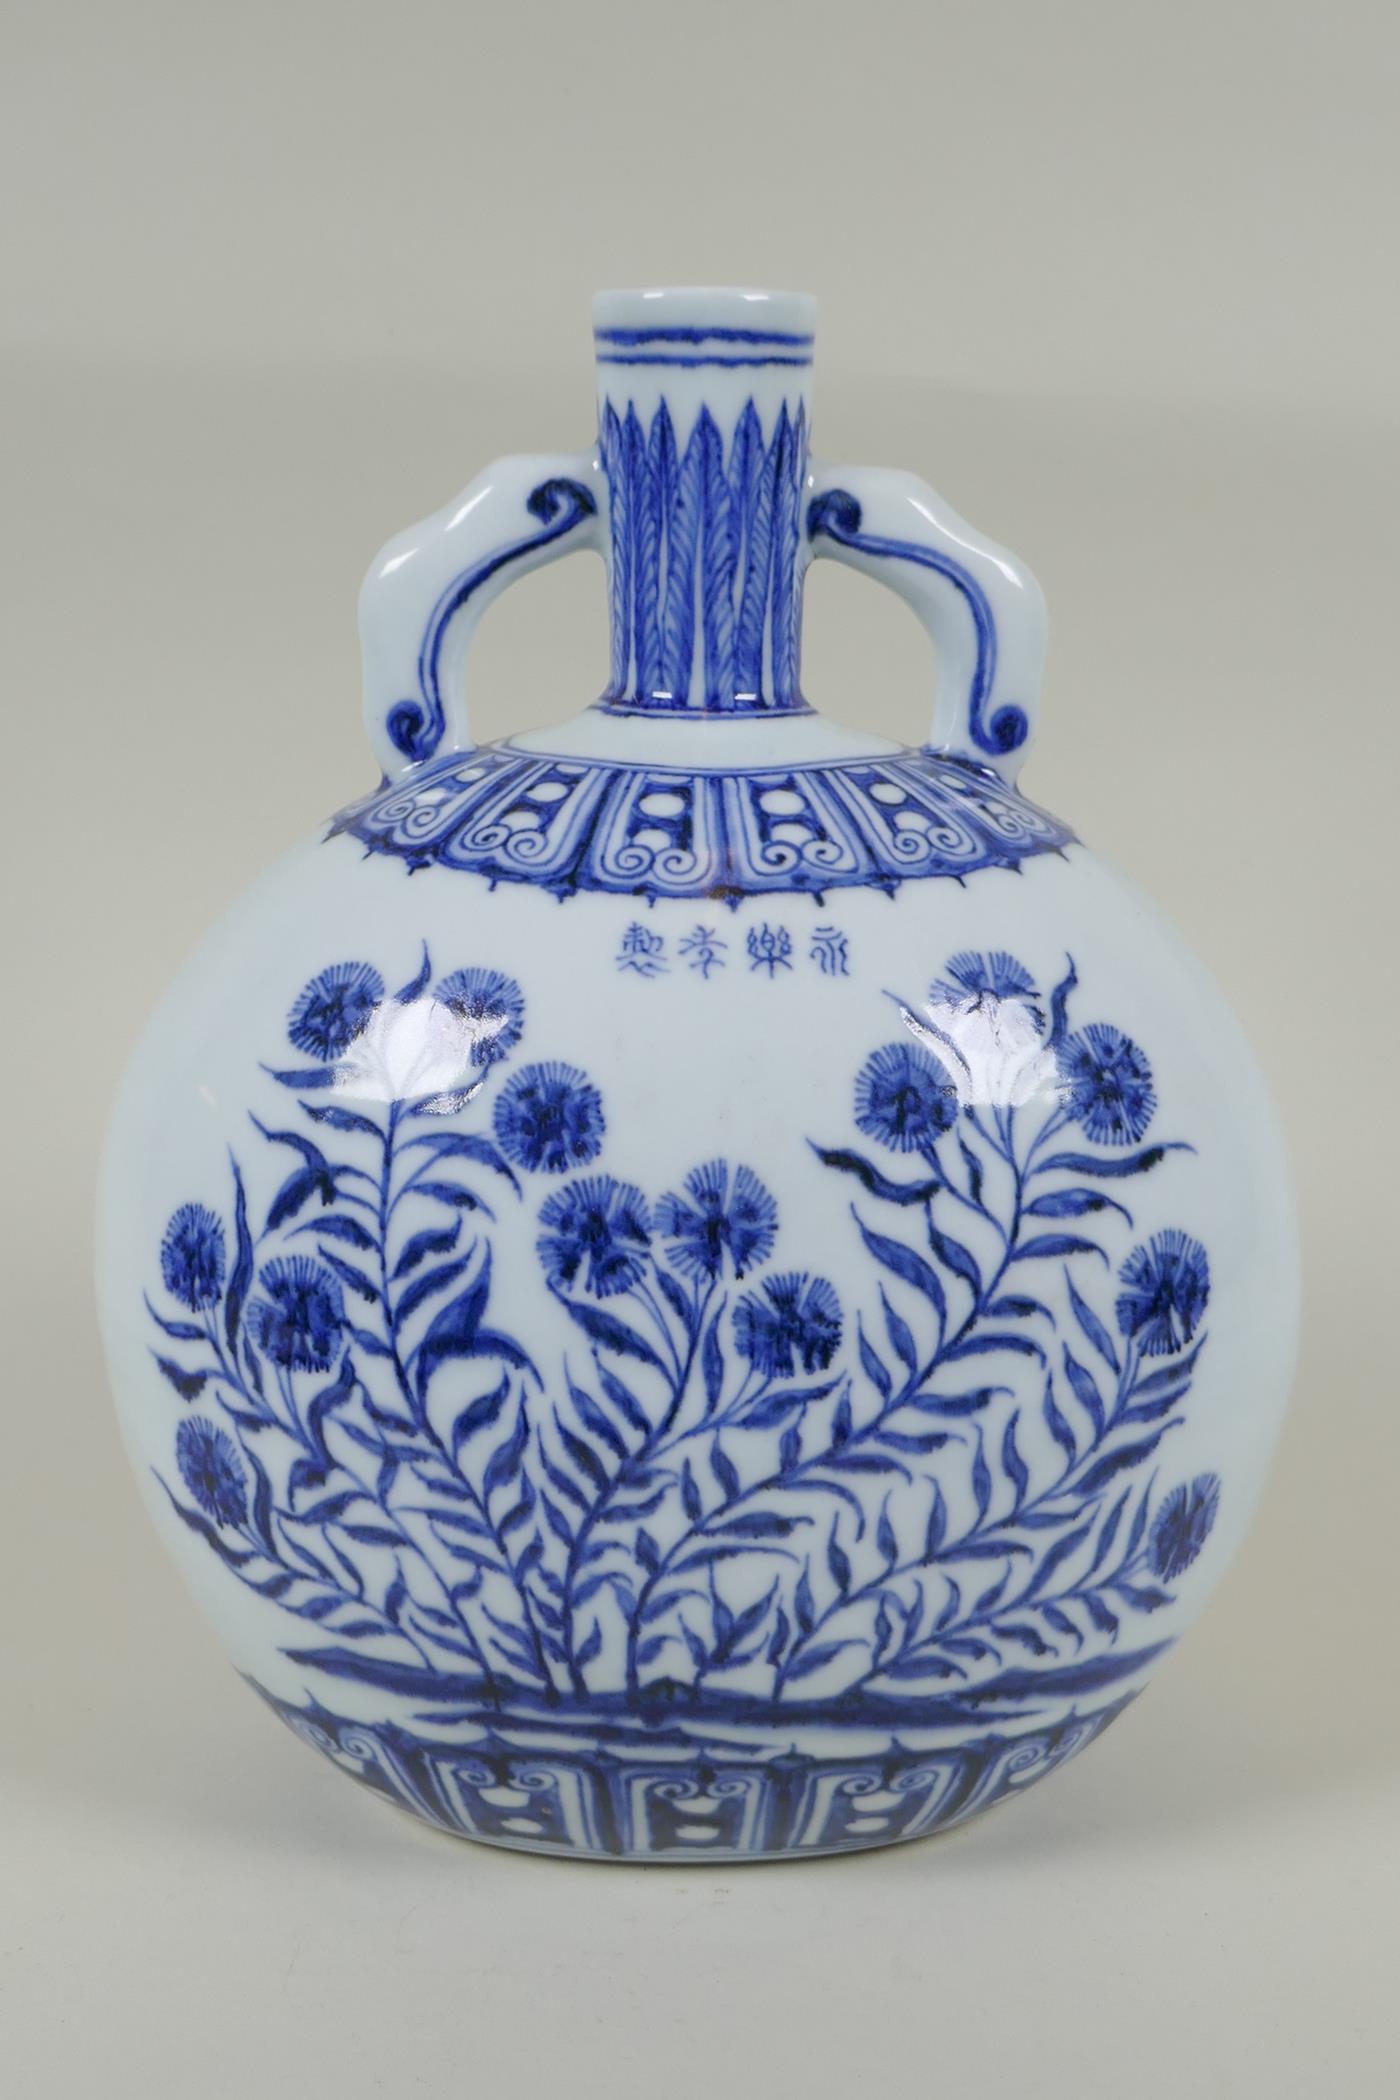 A Chinese blue and white porcelain moon flask with two handles and floral decoration, 4 character